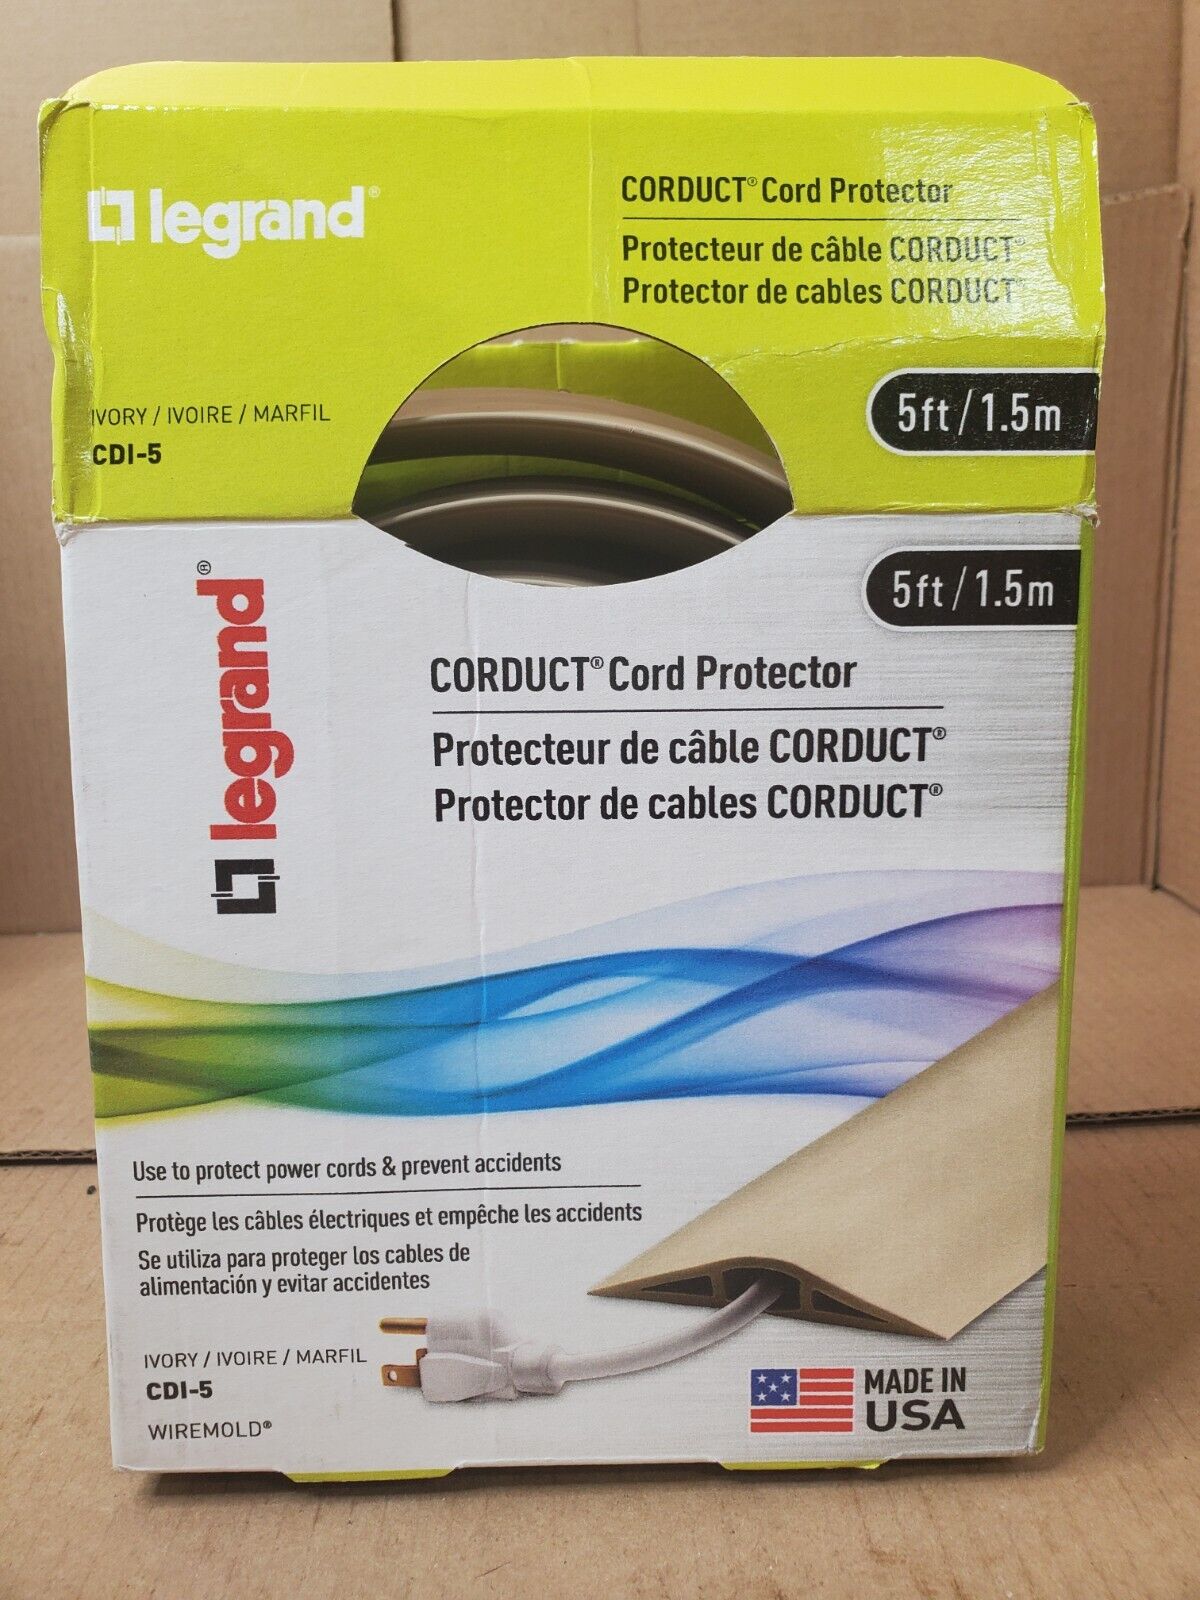 Legrand Corduct Overfloor Cord Protector (Wiremold CDI-5), 5 feet, Ivory